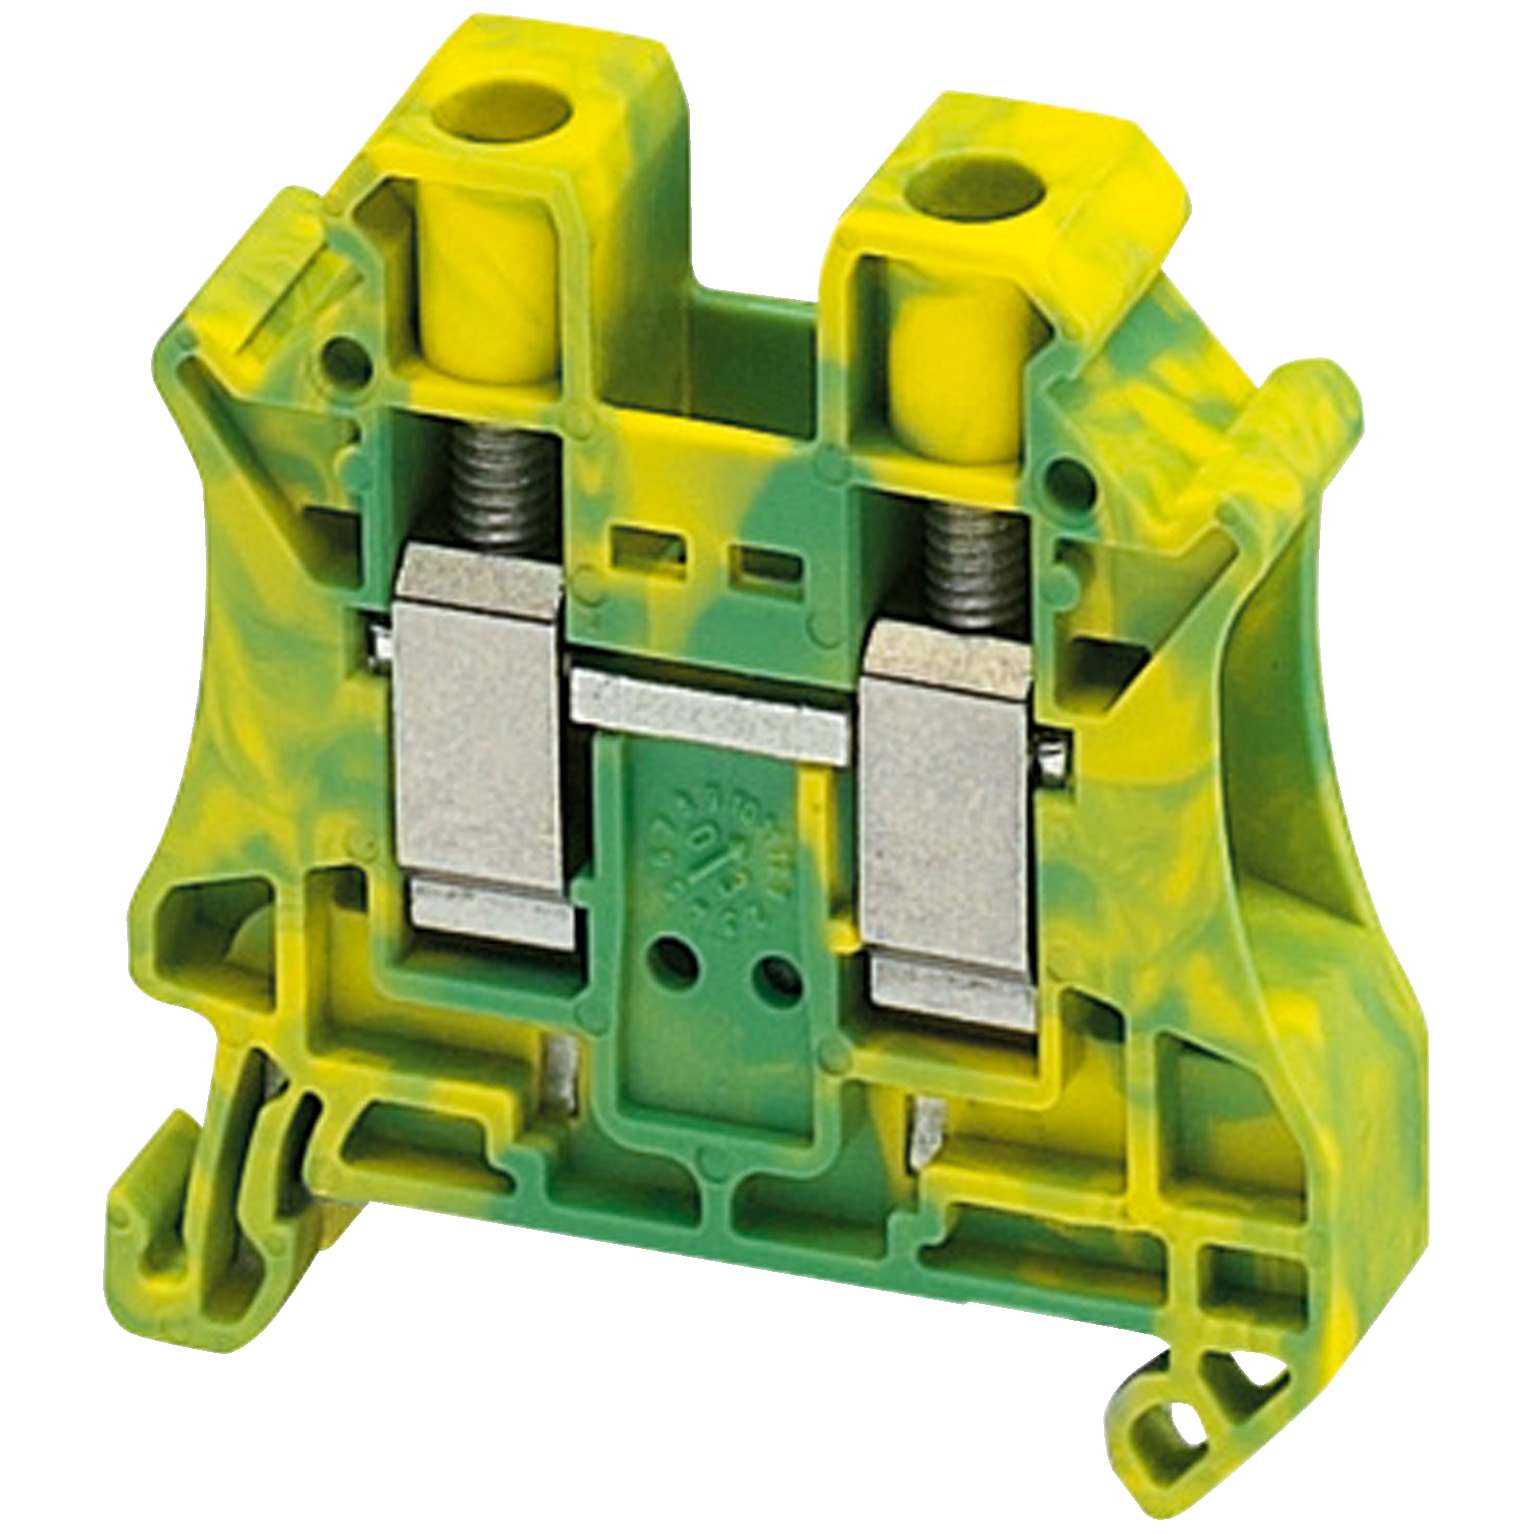 Terminal block, Linergy TR, green-yellow, 10mm2, protective earth, 2 points, Set of 50